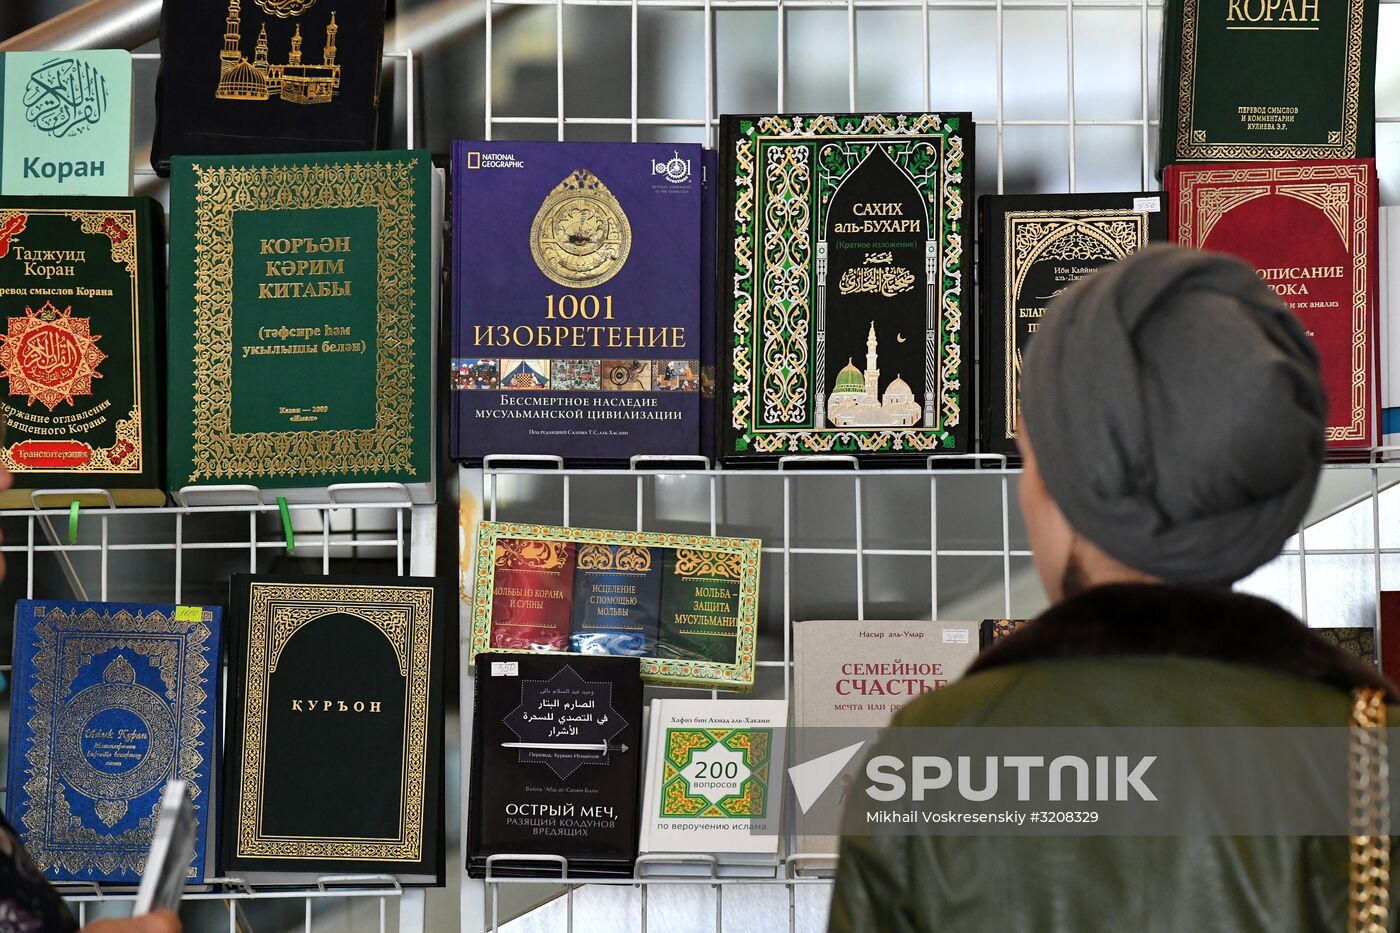 18th Moscow International Quran Reciting Competition